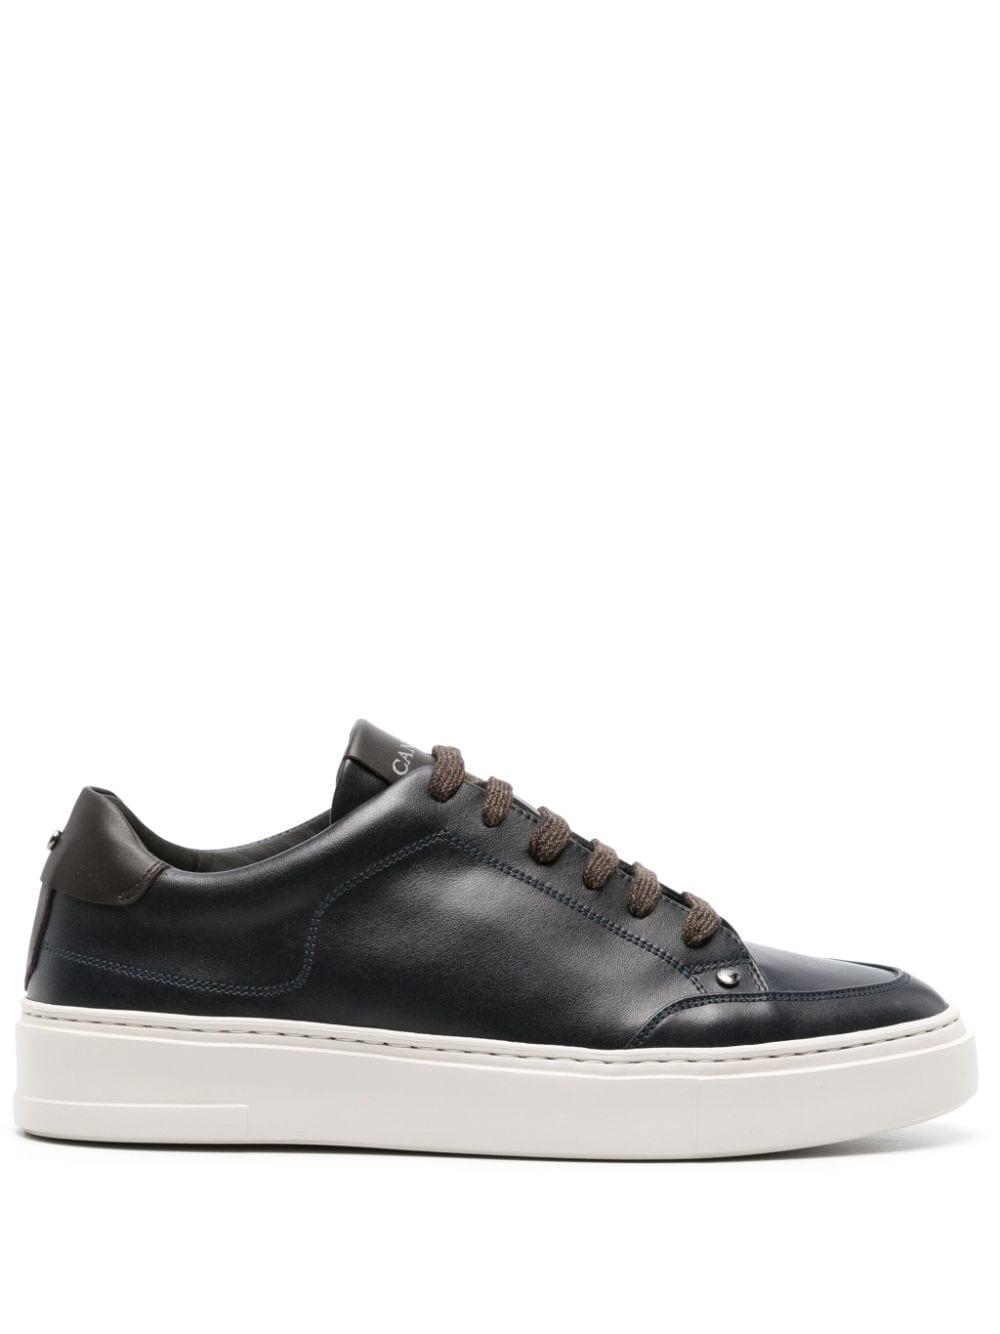 Canali Leather Low-top Sneakers in Black for Men | Lyst